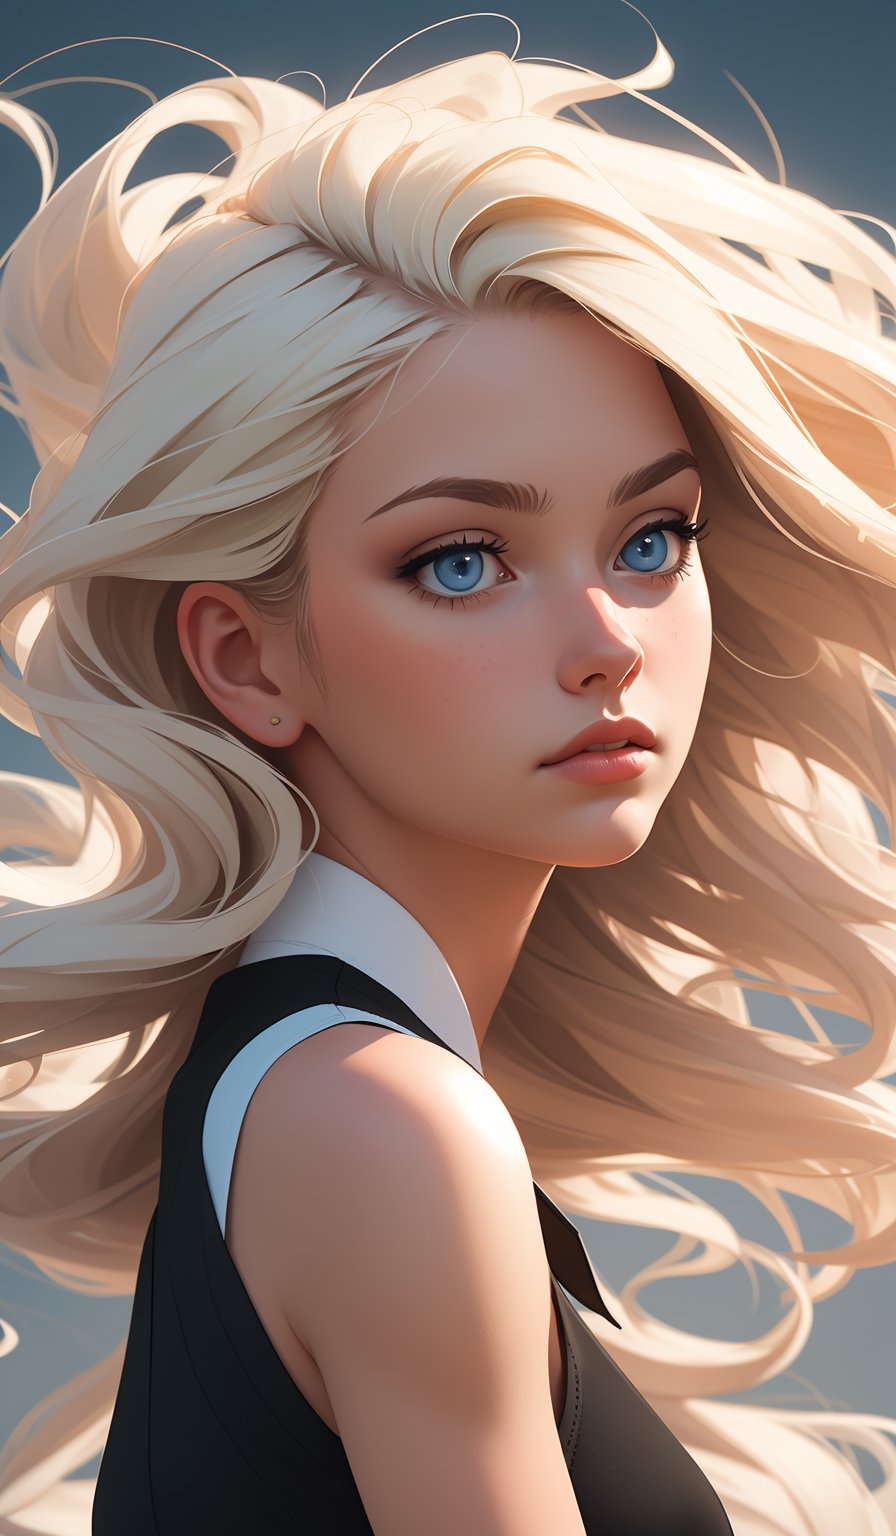 A stunning digital art piece featuring a female portrait rendered in realistic 3D illustration. The subject has captivating blue eyes and flowing blonde hair flowing and blowing in wind. Soft lighting enhances her contemplative expression, set against a dark background for contrast. She wears a classic black dress with subtle makeup, highlighting her features with high-resolution detail and textured depth. The composition evokes emotional depth and a dramatic mood, capturing her serene demeanor in a cinematic light,concept art,midjourney,1 girl